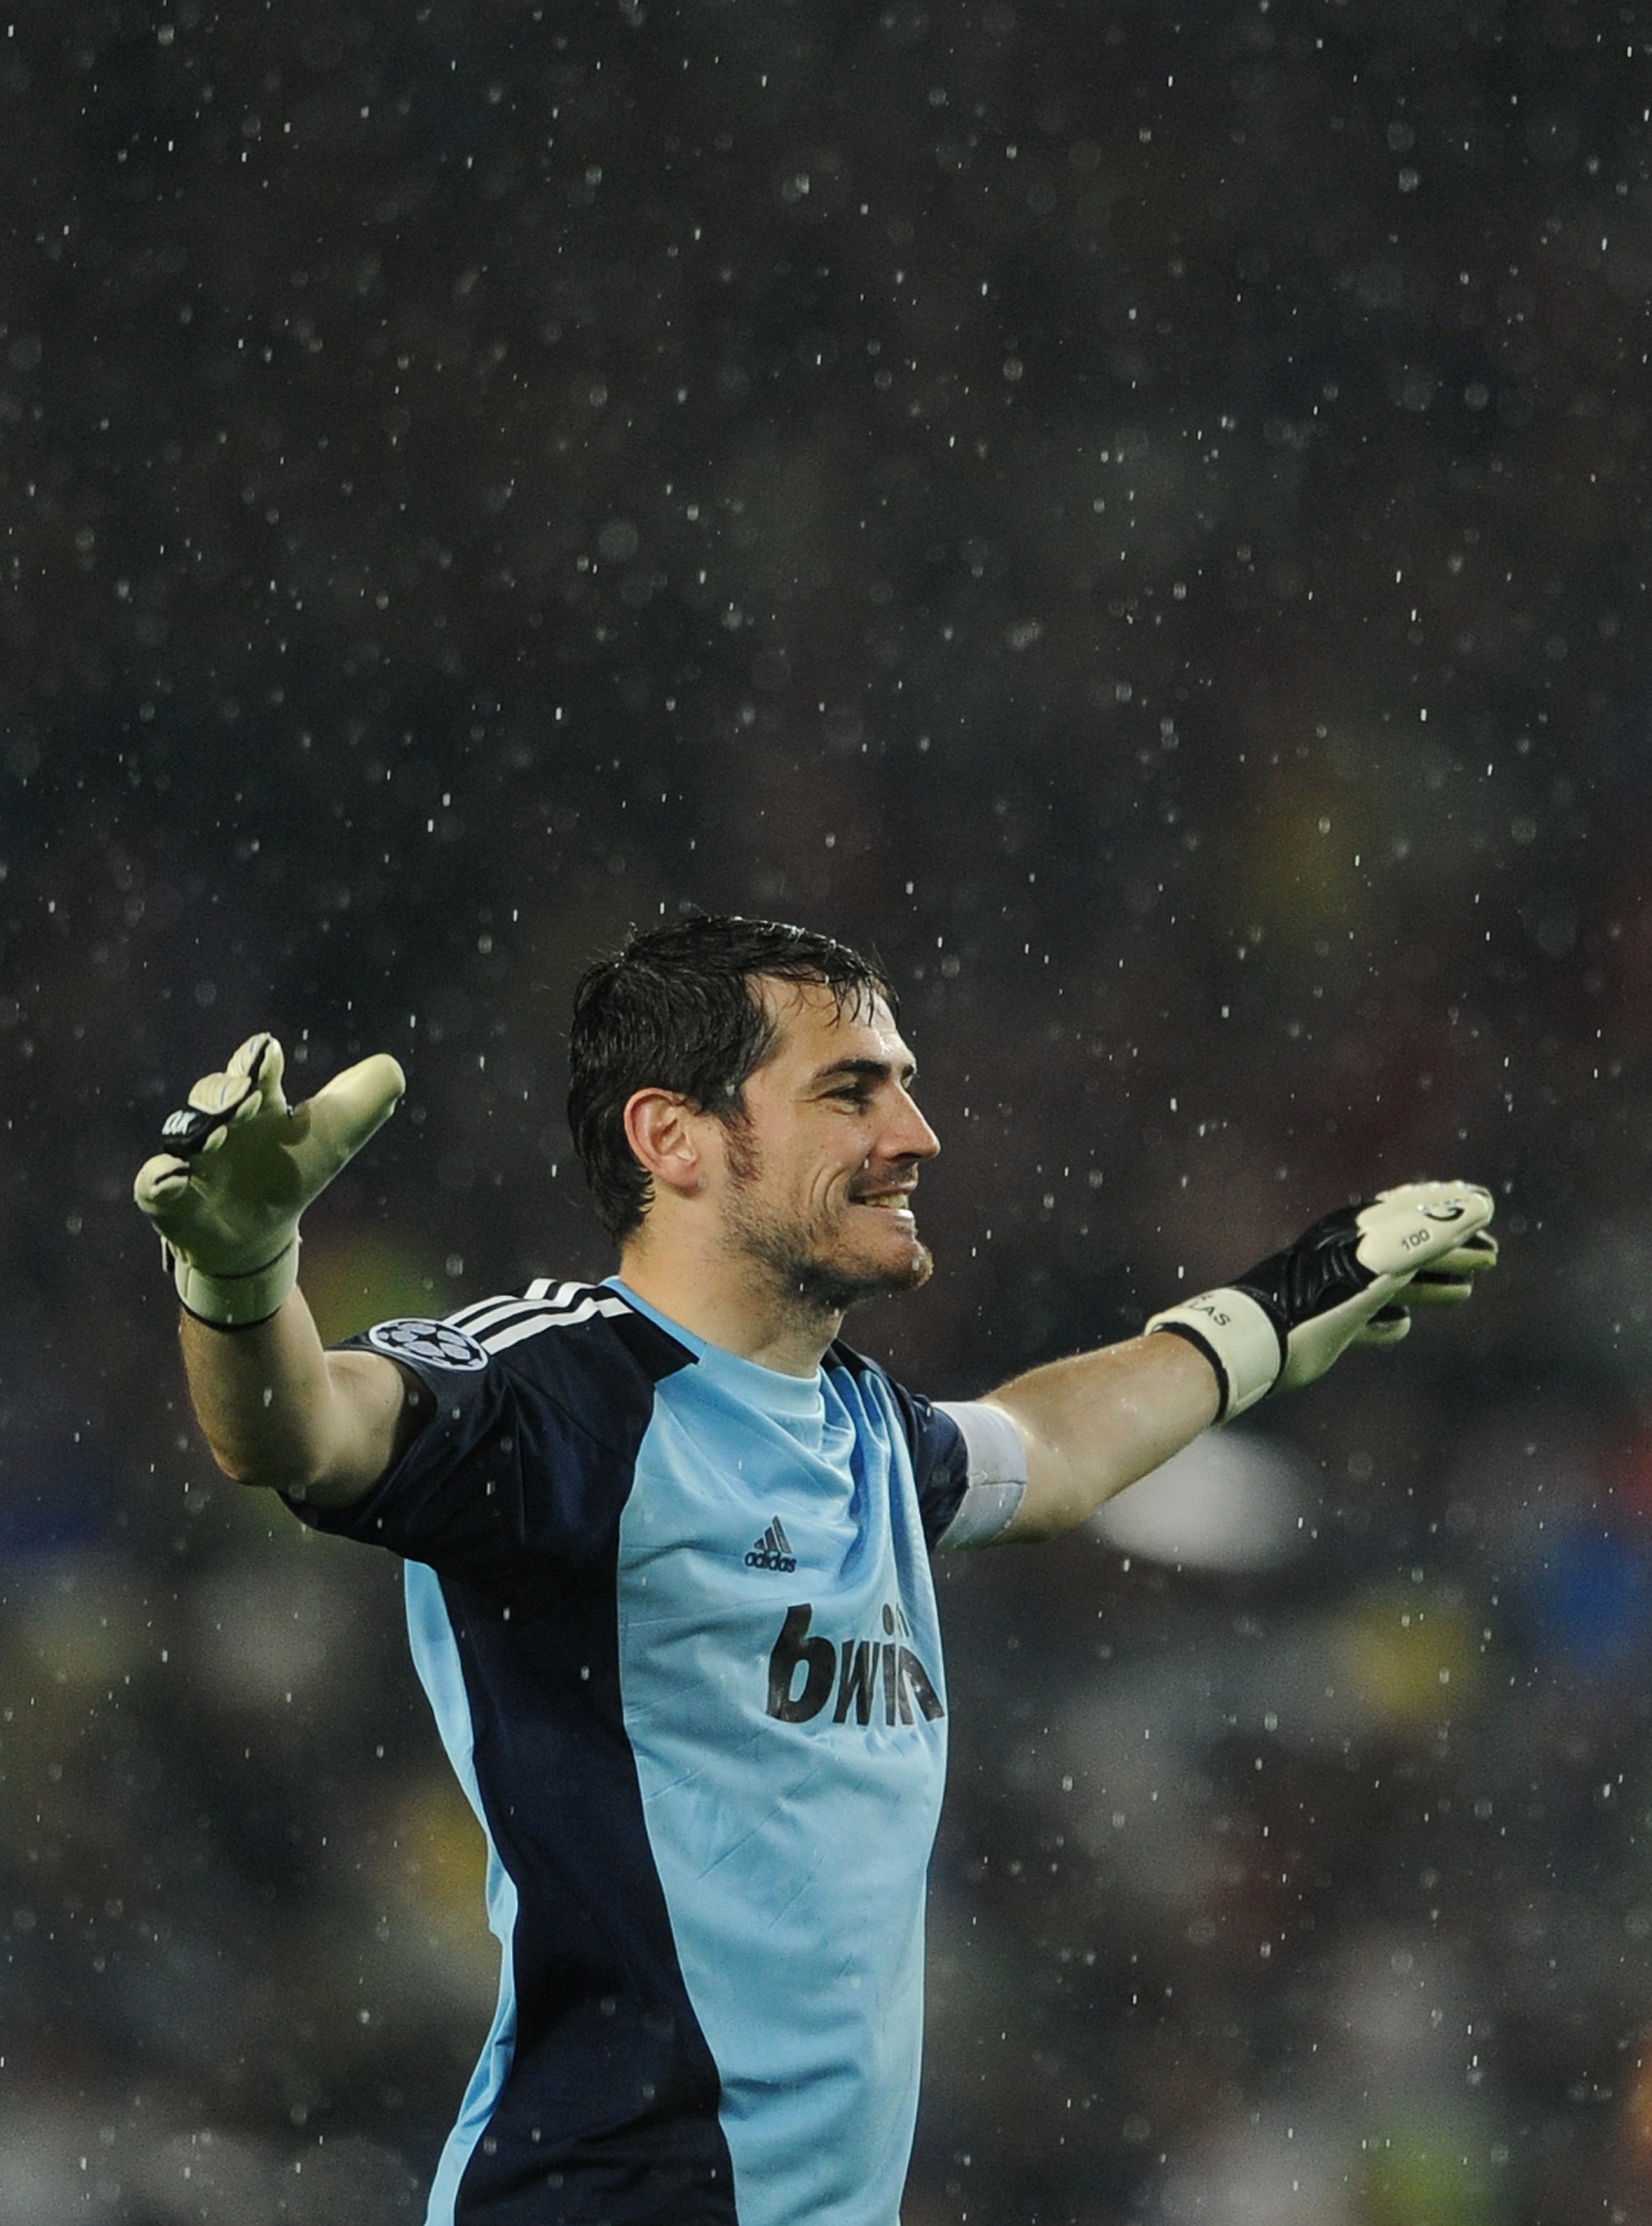 BARCELONA, SPAIN - MAY 03:  Goalkeeper Iker Casillas of Real Madrid reacts during the UEFA Champions League Semi Final second leg match between Barcelona and Real Madrid at the Camp Nou stadium on May 3, 2011 in Barcelona, Spain.  (Photo by Jasper Juinen/